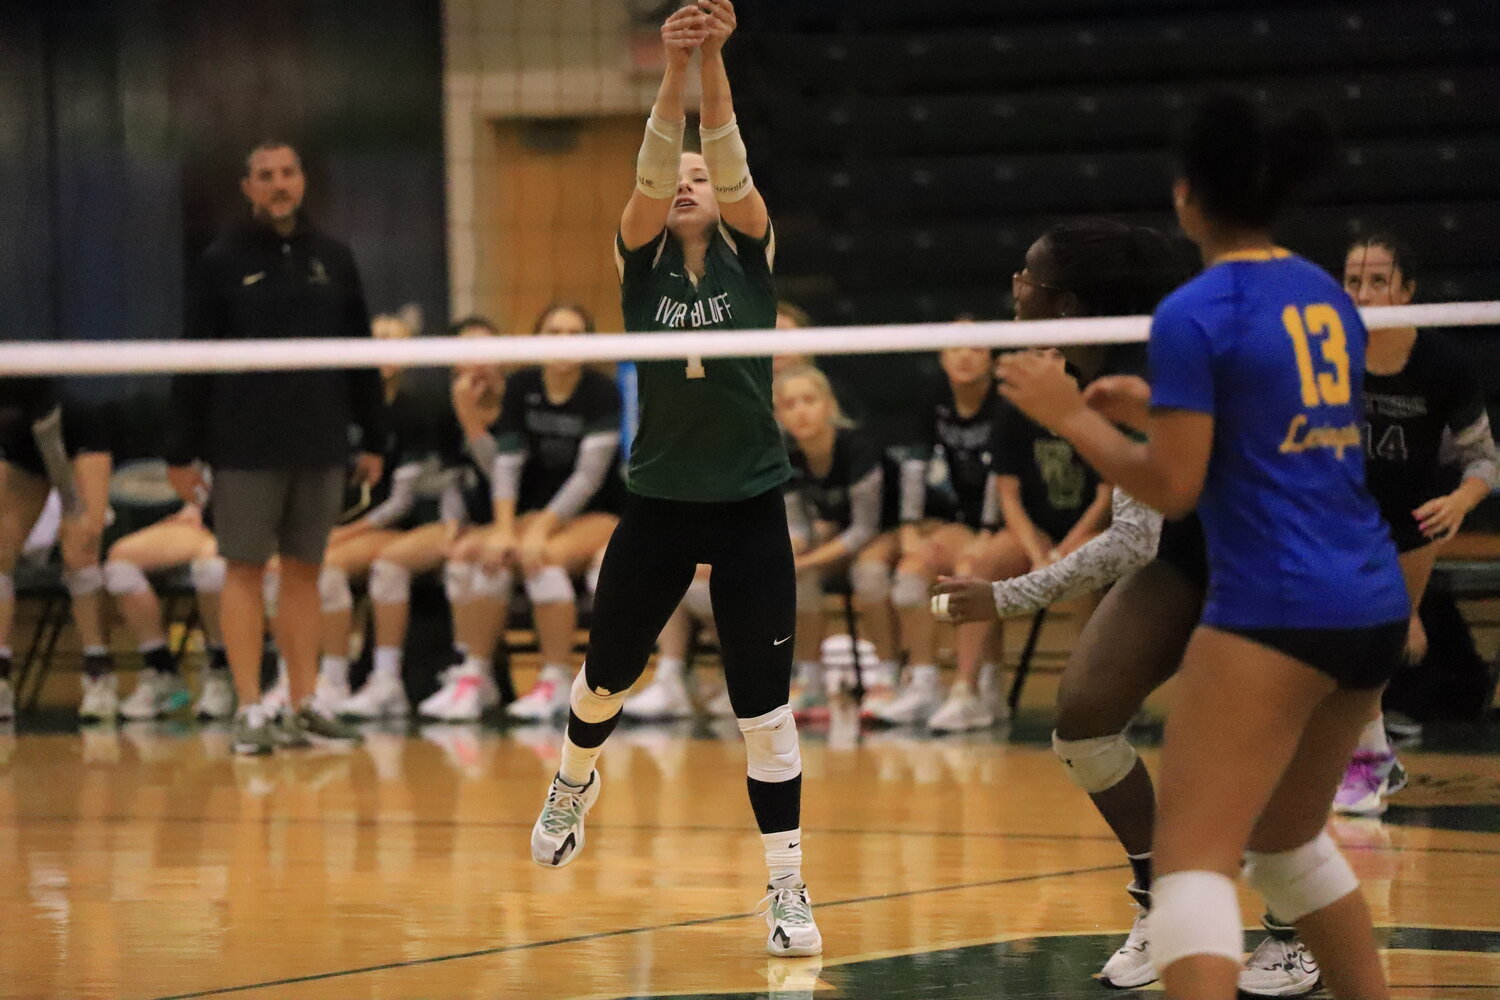 River Bluff’s Masyn McClanahan attempts a serve during their 3-0 loss to Lexington.